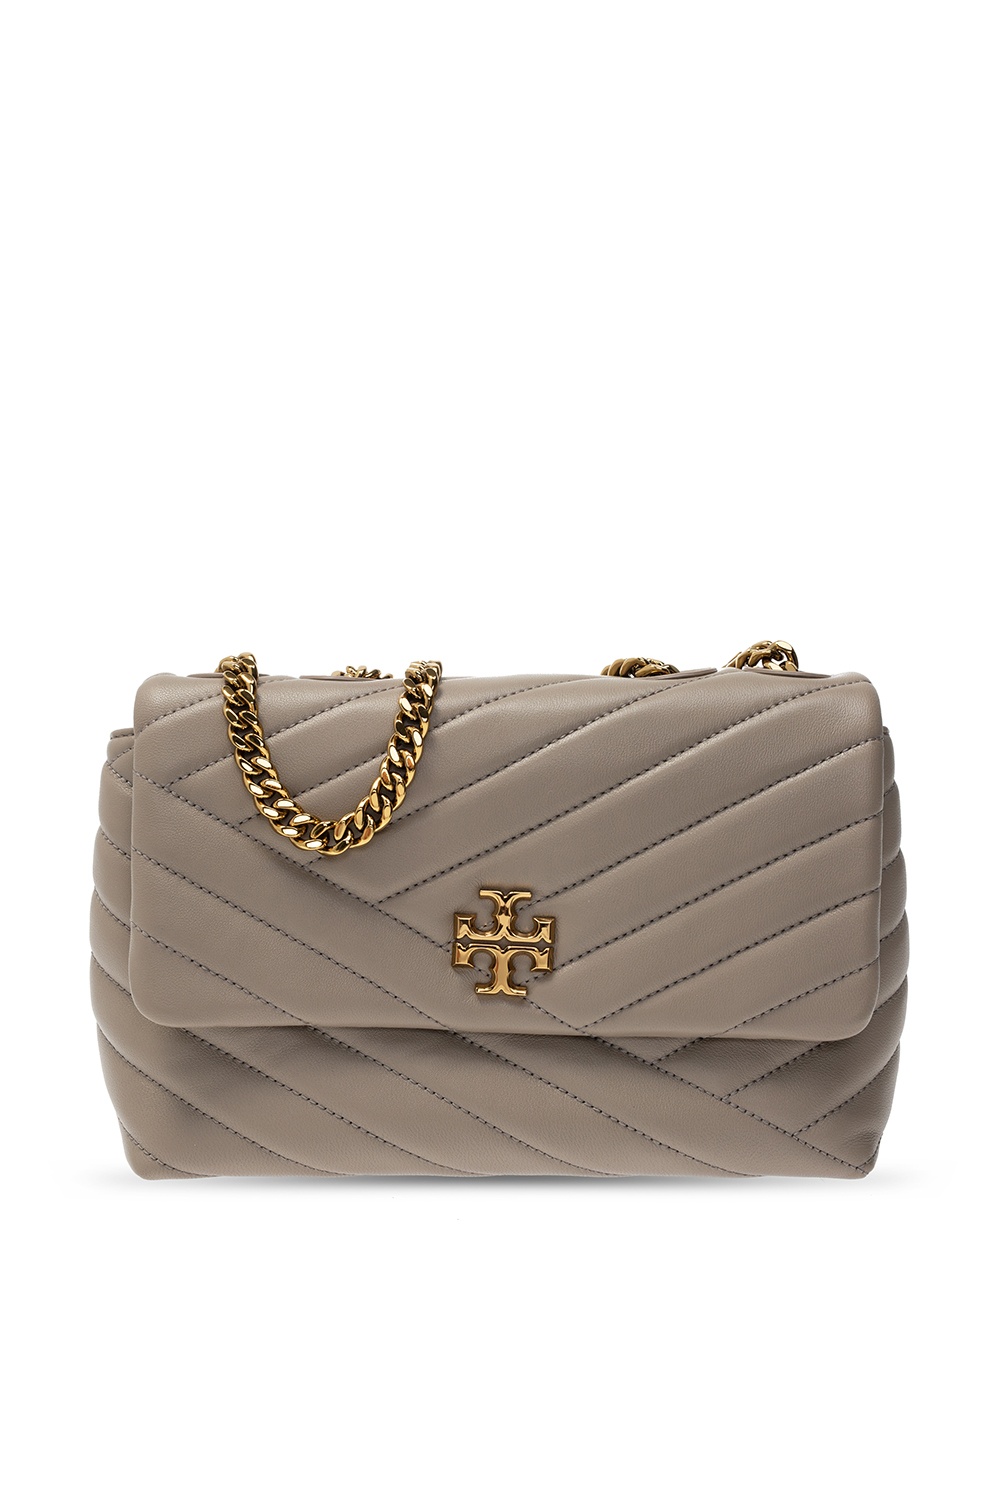 Tory Burch Quilted Leather Shoulder Bag With Metal Logo In Brown